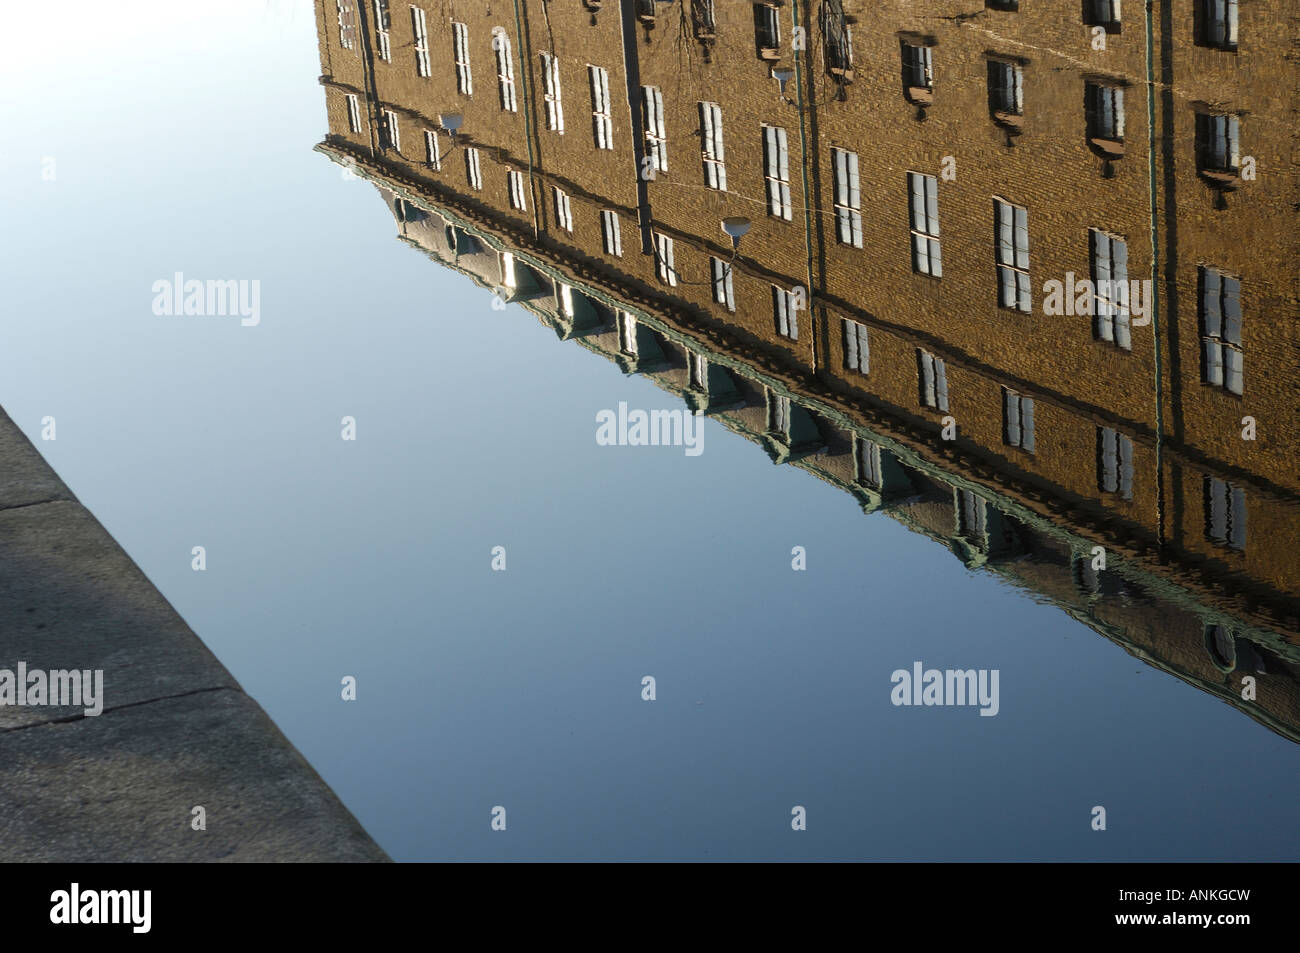 Reflection of building in water, Gothenburg, Sweden Stock Photo